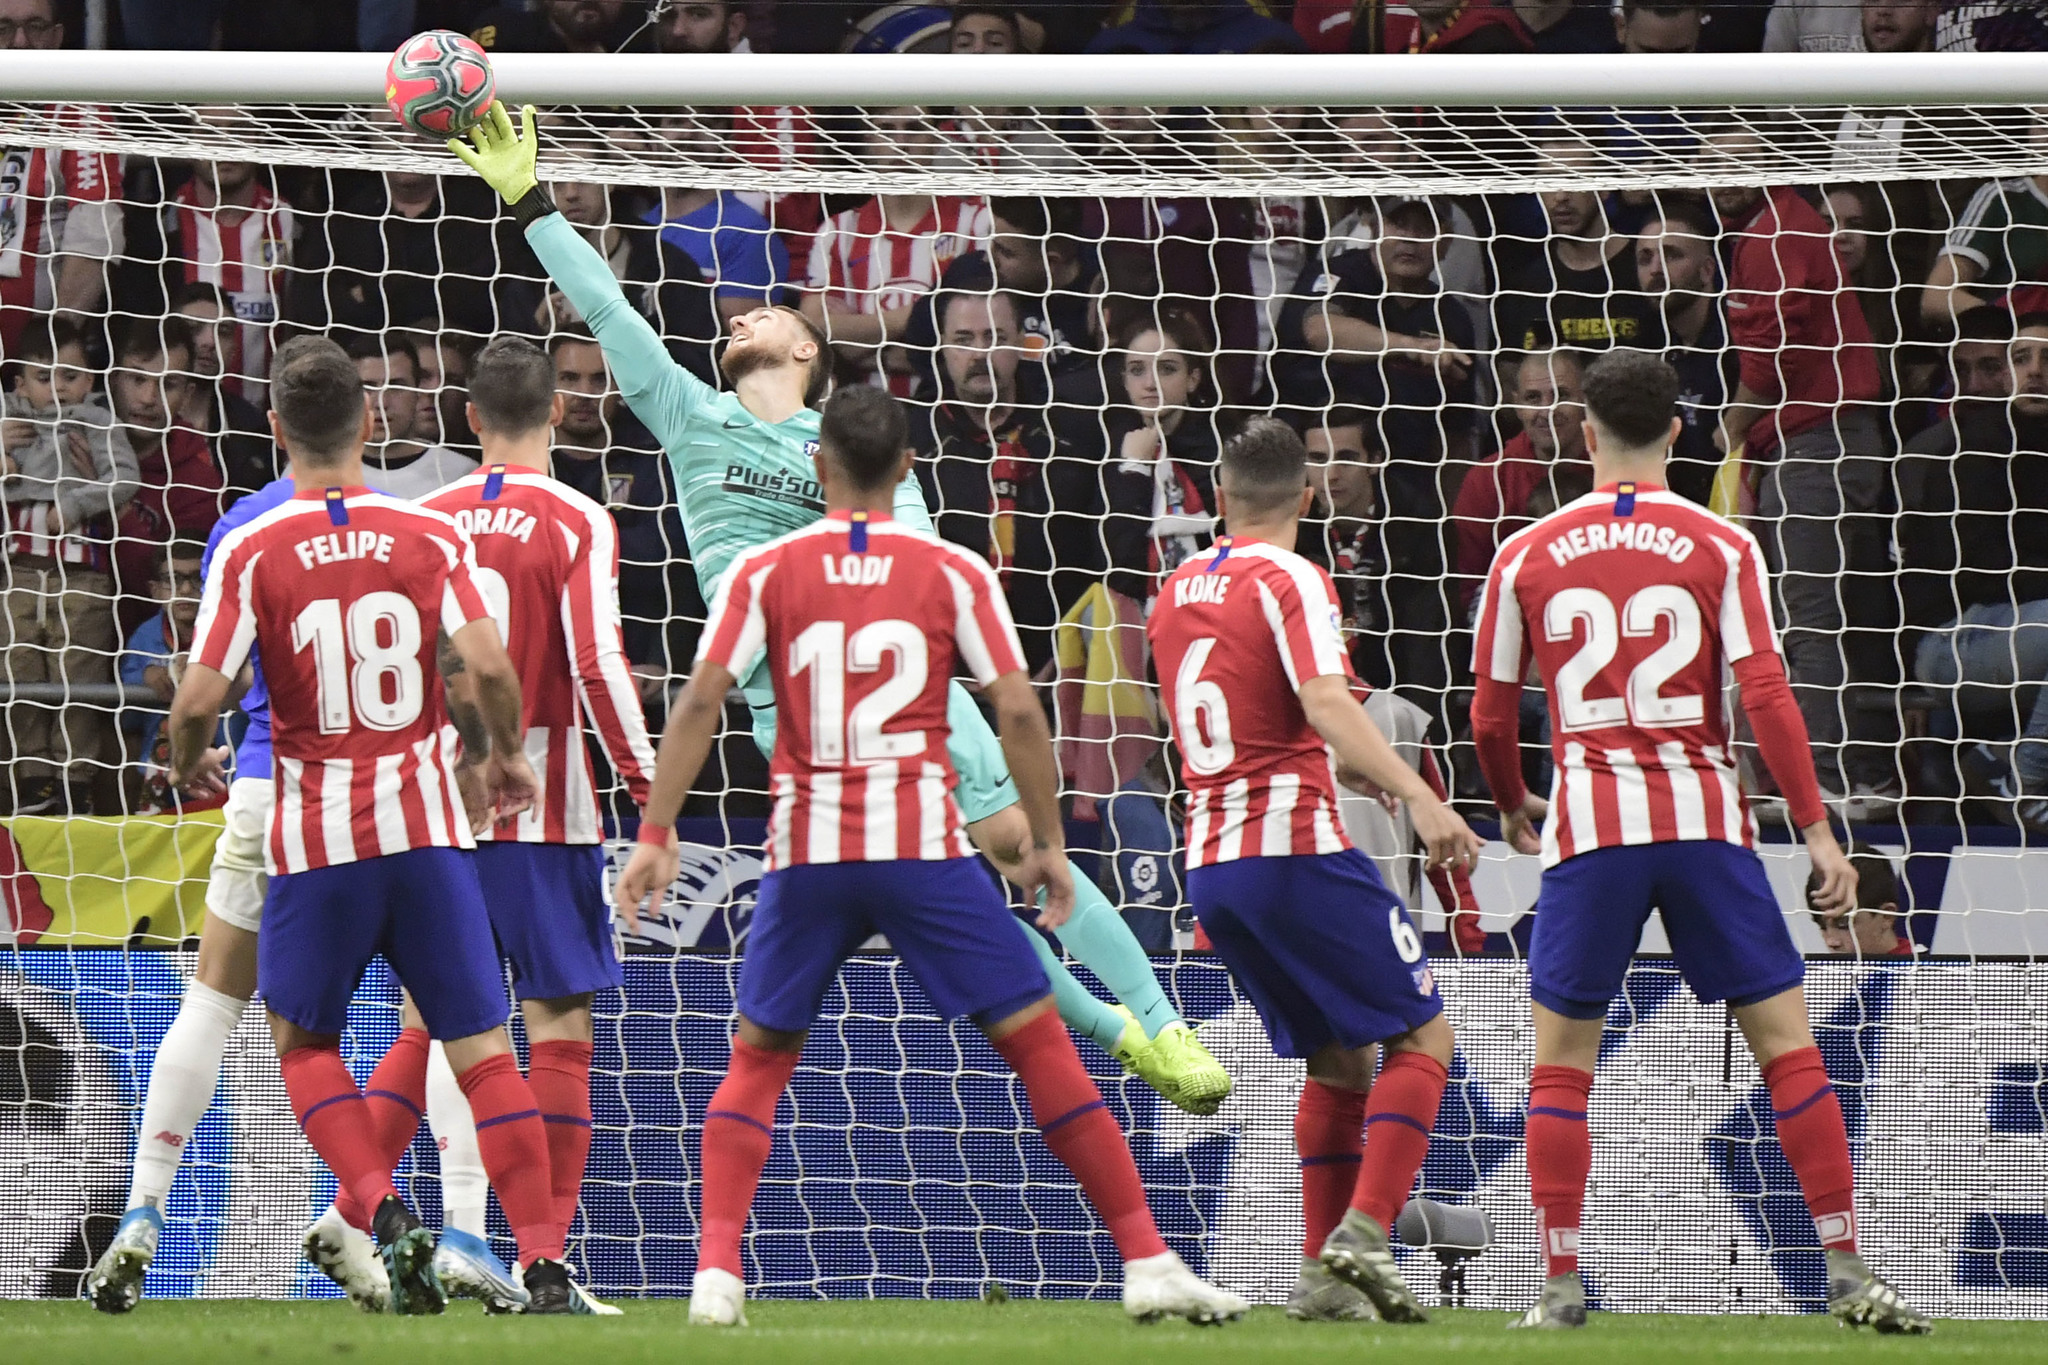 Atletico Madrids Slovenian goalkeeper Jan <HIT>Oblak</HIT> dives to clear the ball during the Spanish league football match between Club Atletico de Madrid and Athletic Club Bilbao at the Wanda Metropolitano stadium in Madrid on October 26, 2019. (Photo by JAVIER SORIANO / AFP)